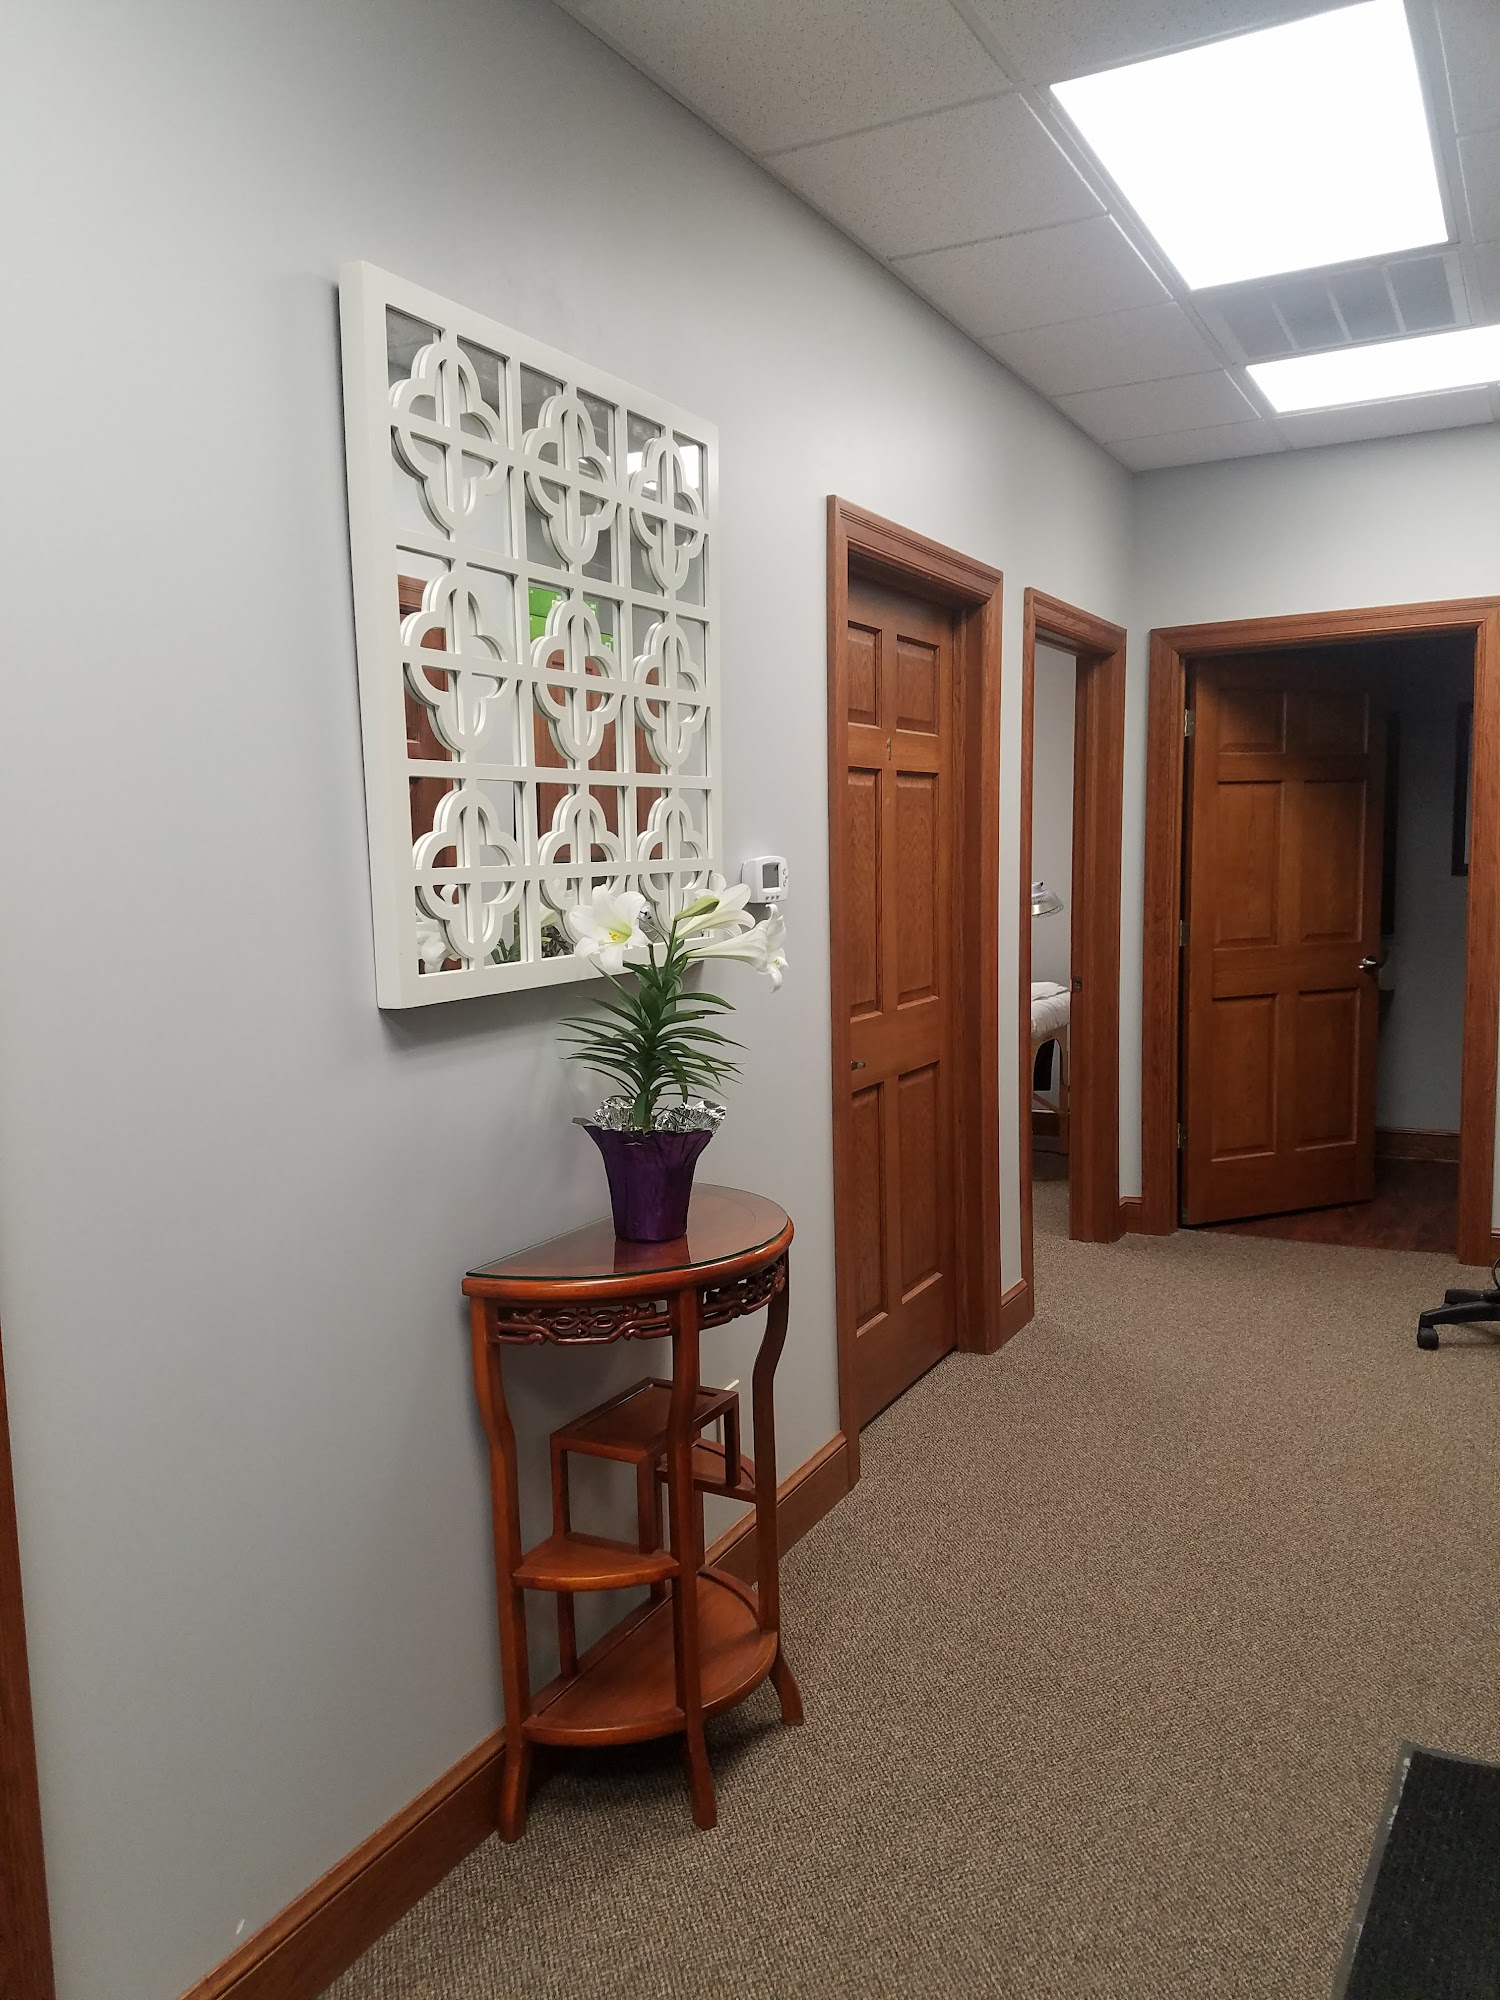 Qi Acupuncture and Wellness